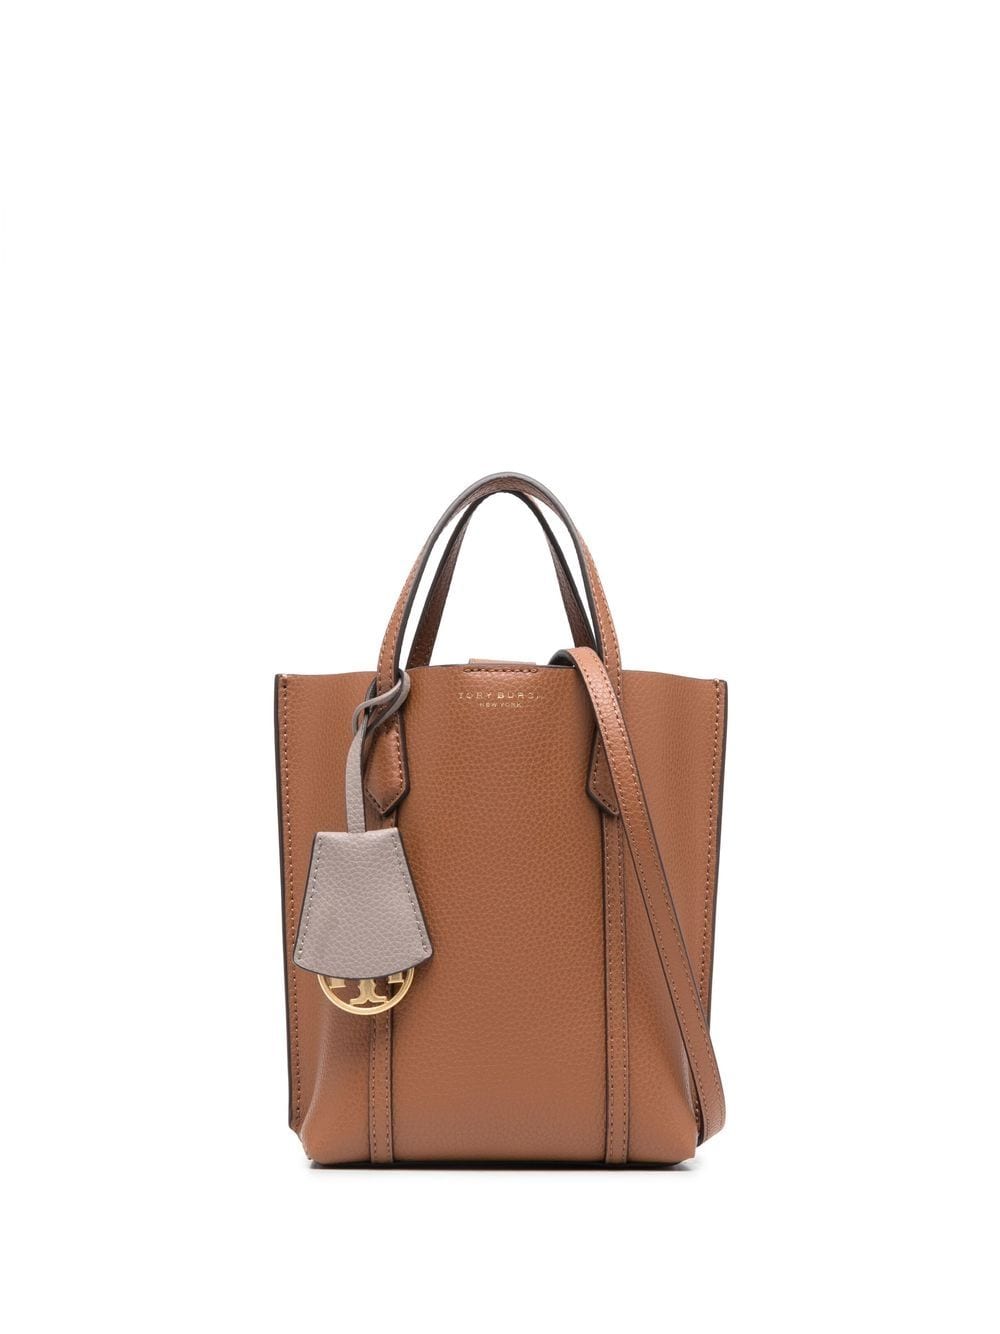 Tory Burch pebbled-leather tote bag - Brown von Tory Burch